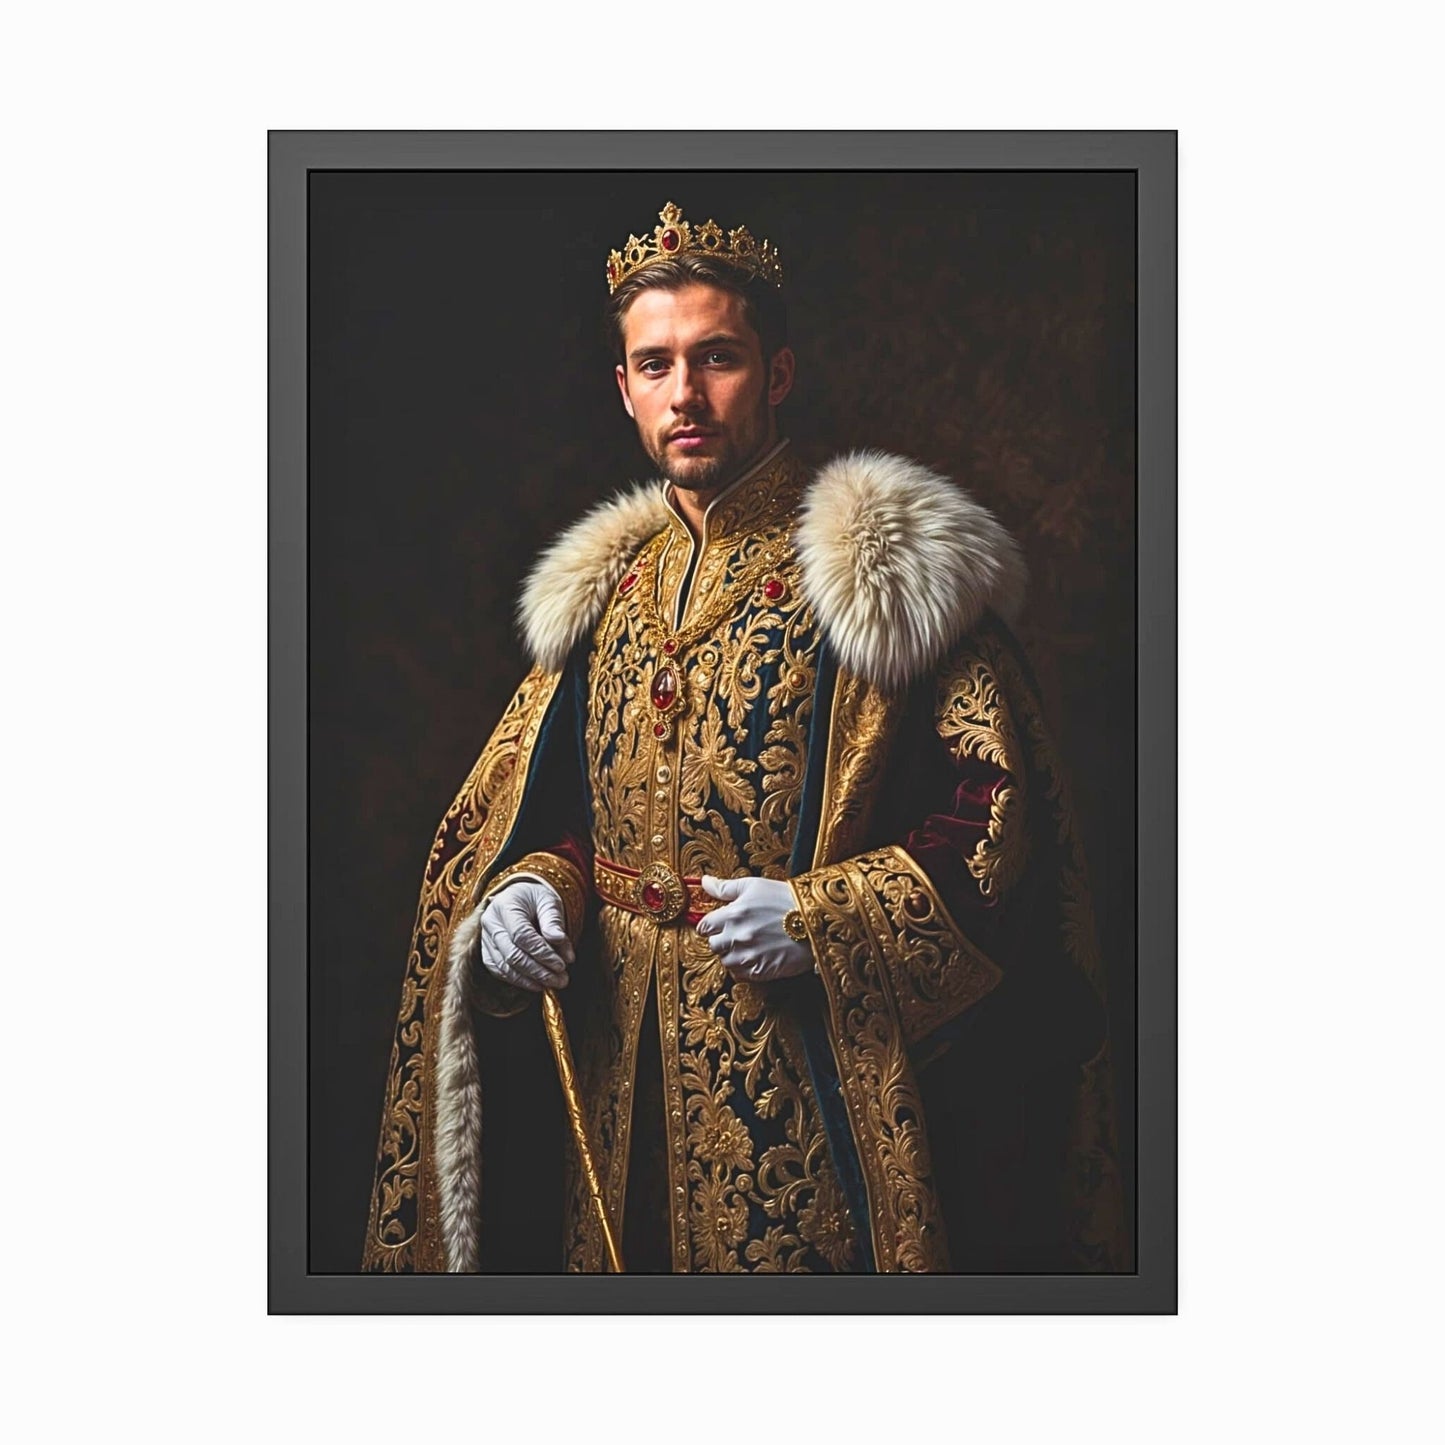 Create a personalized royal portrait from a photo, featuring a Renaissance style and historical flair. Perfect for birthdays and special occasions, this custom king portrait makes an unforgettable gift for him. Digital download available.